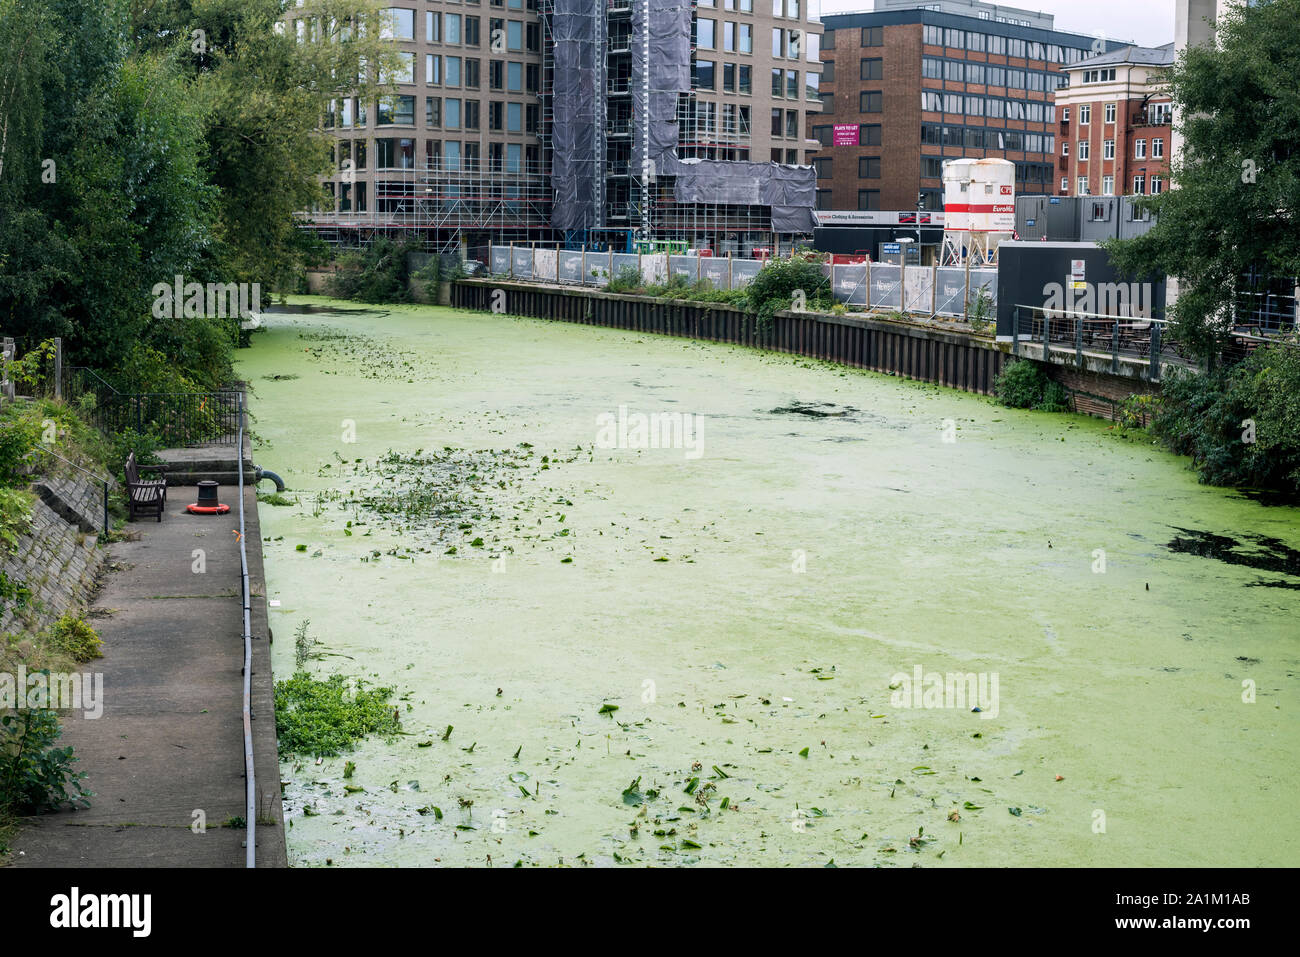 Green duckweed, Lemnoideae carpeting the River Foss, City of York, UK September 2019,  with commercial buildings in background. Stock Photo